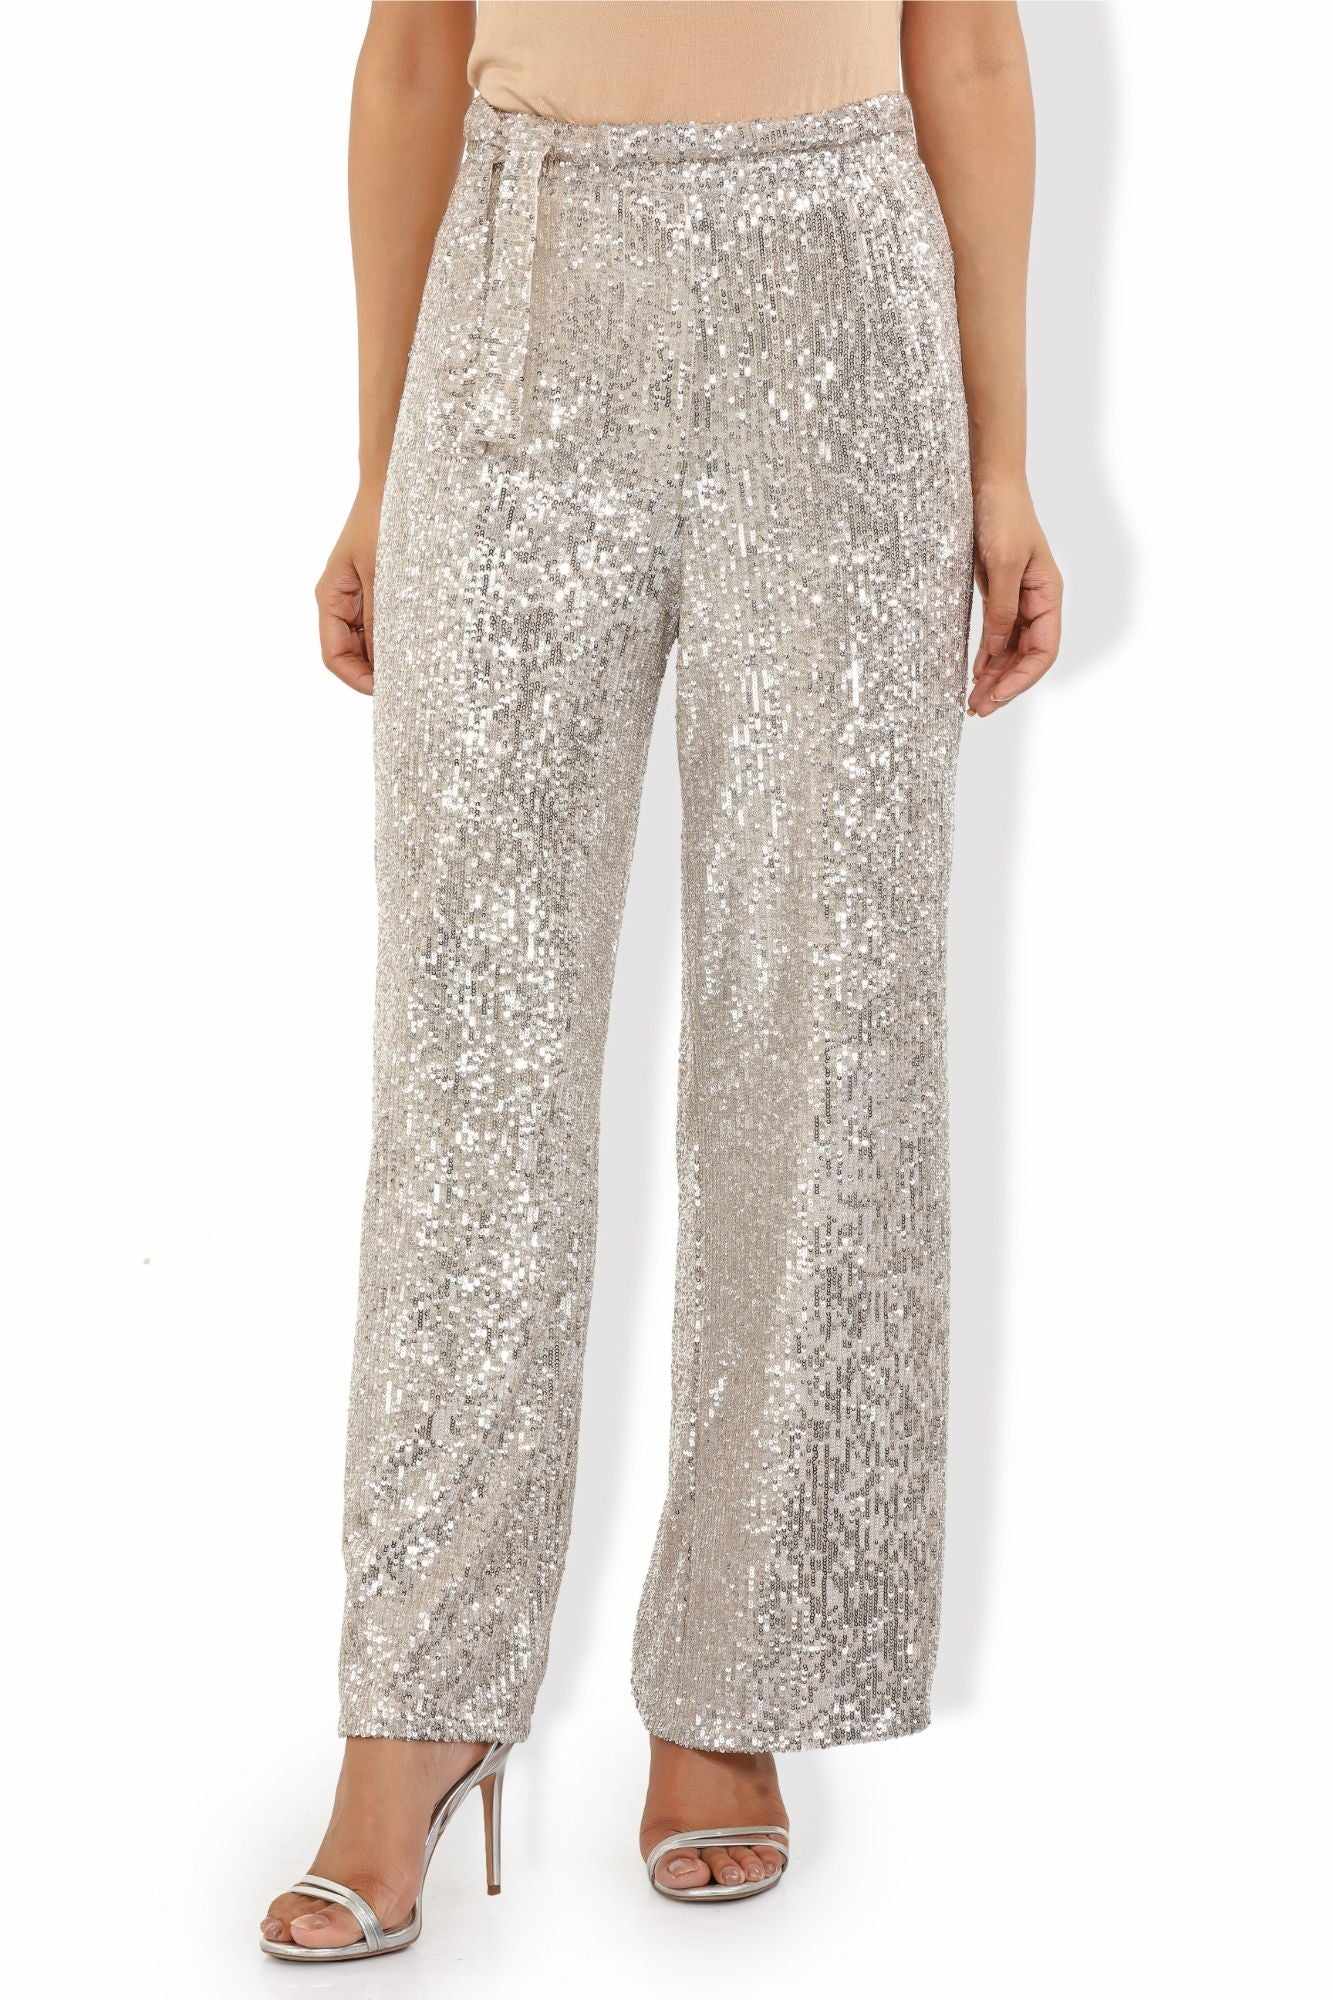 glittering sequined tulle high rise pants  